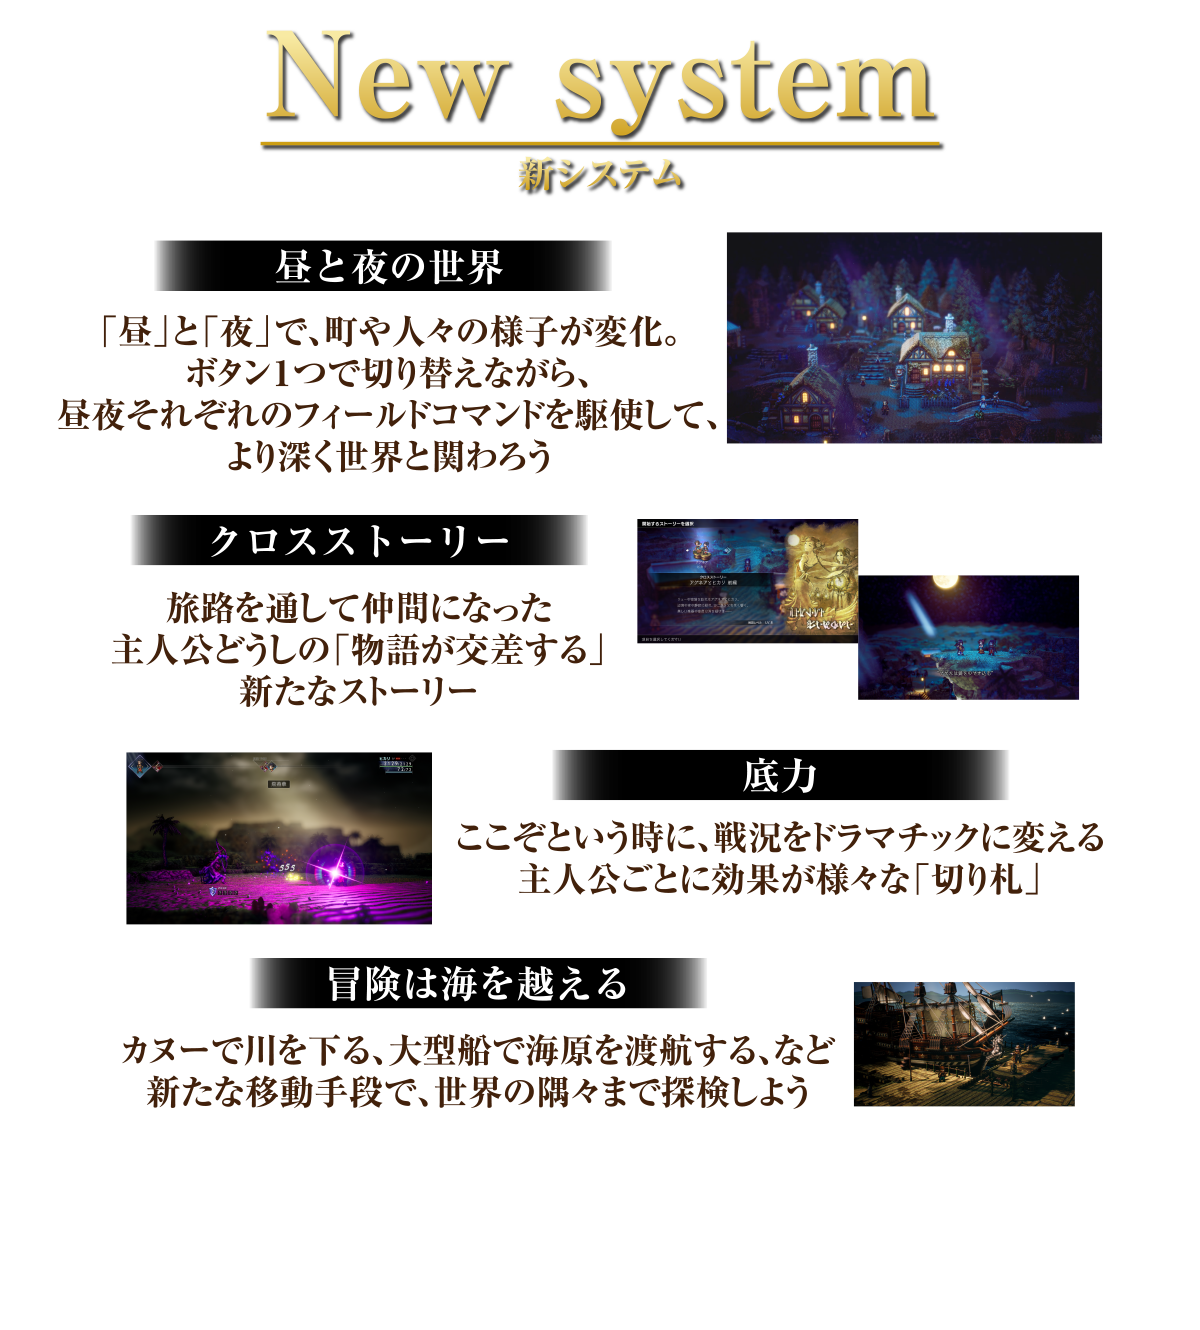 New system